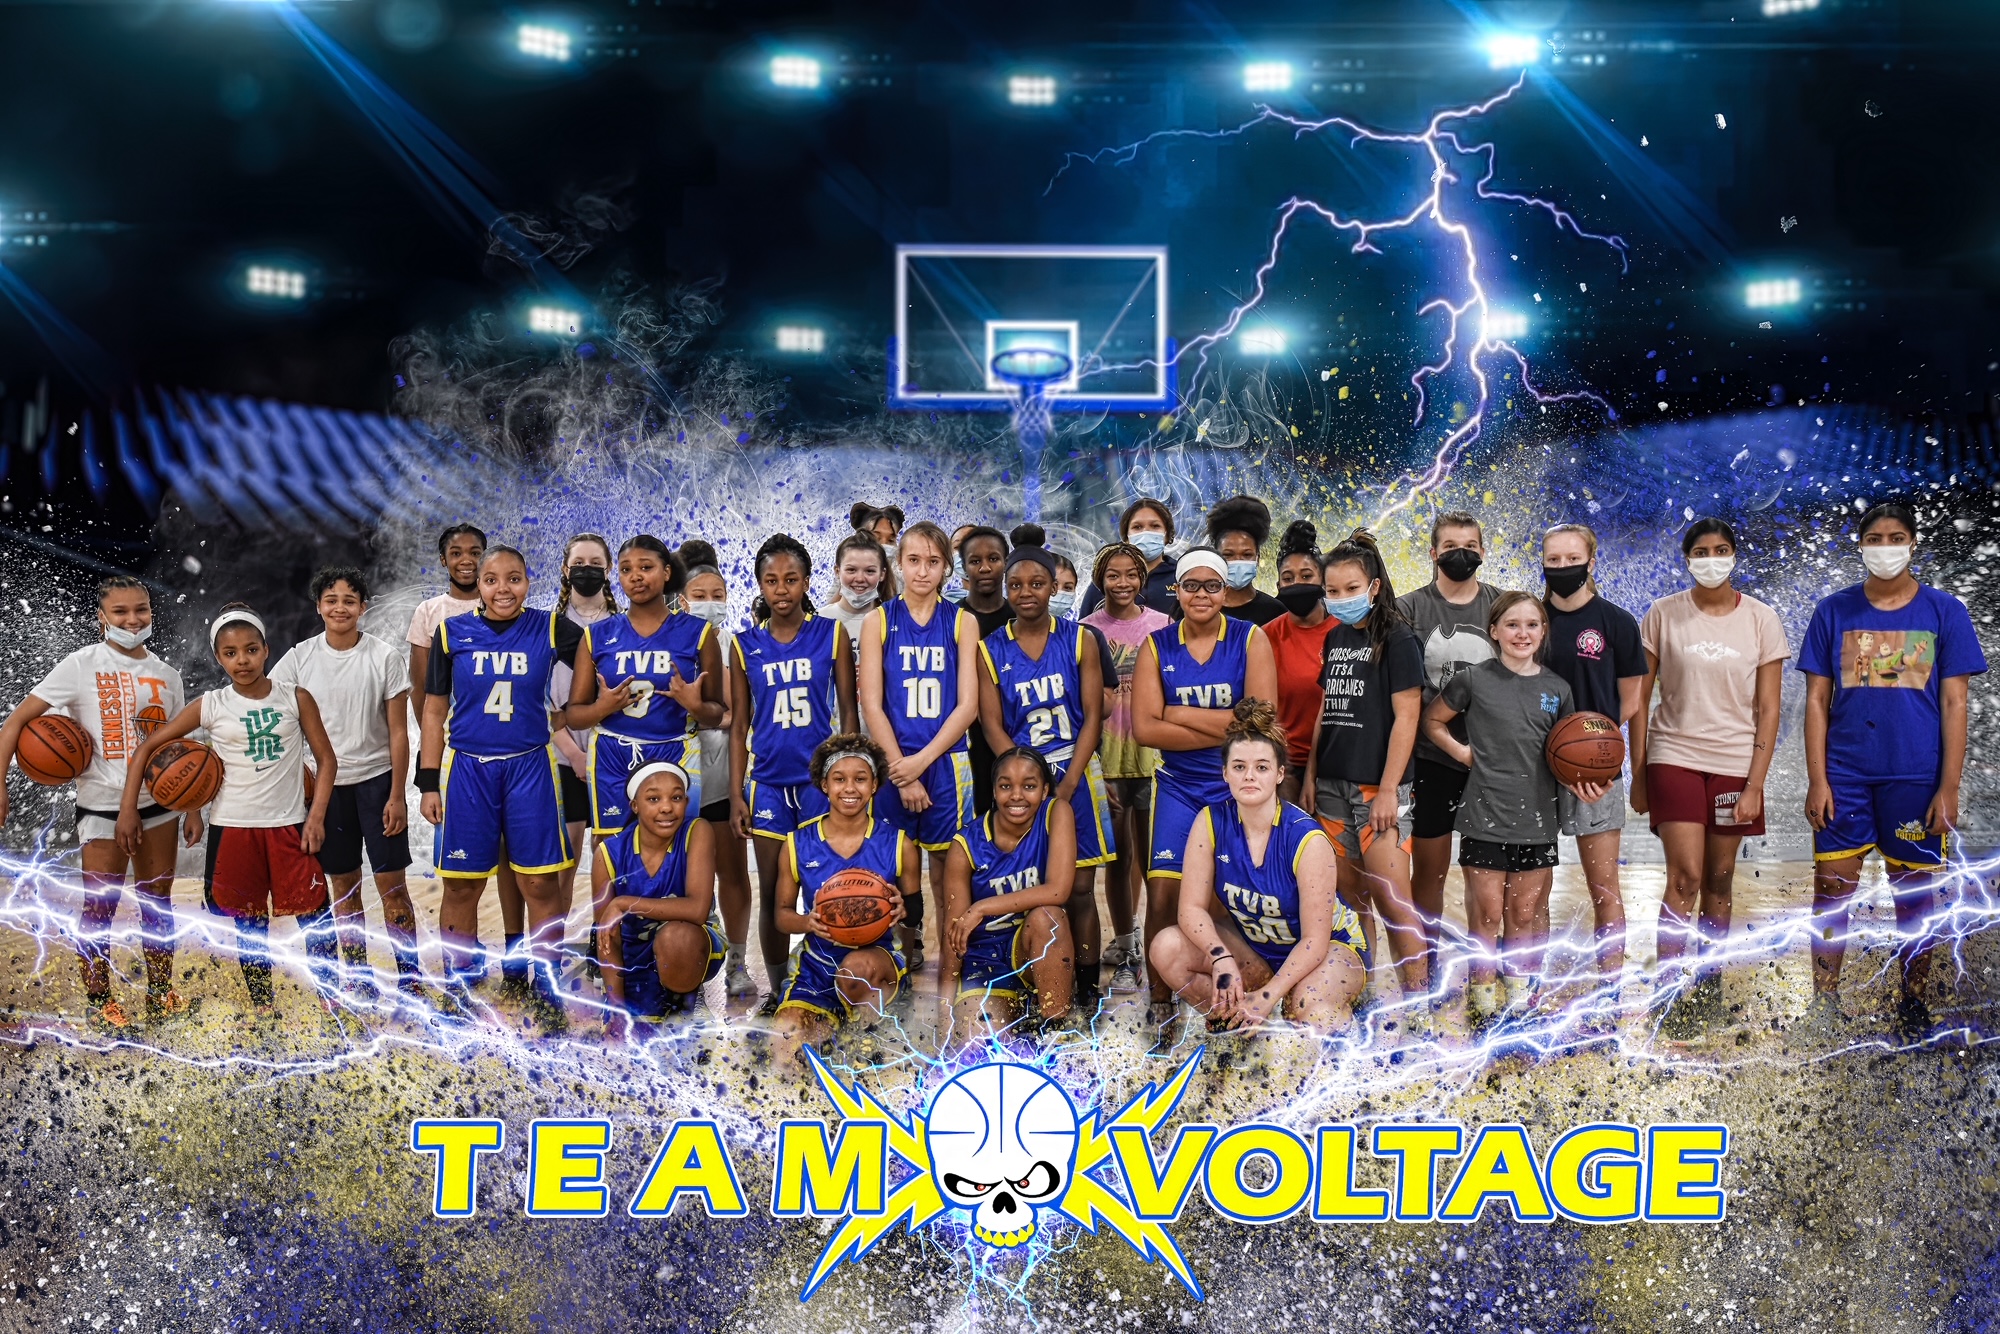 A digital picture of the Team Voltage